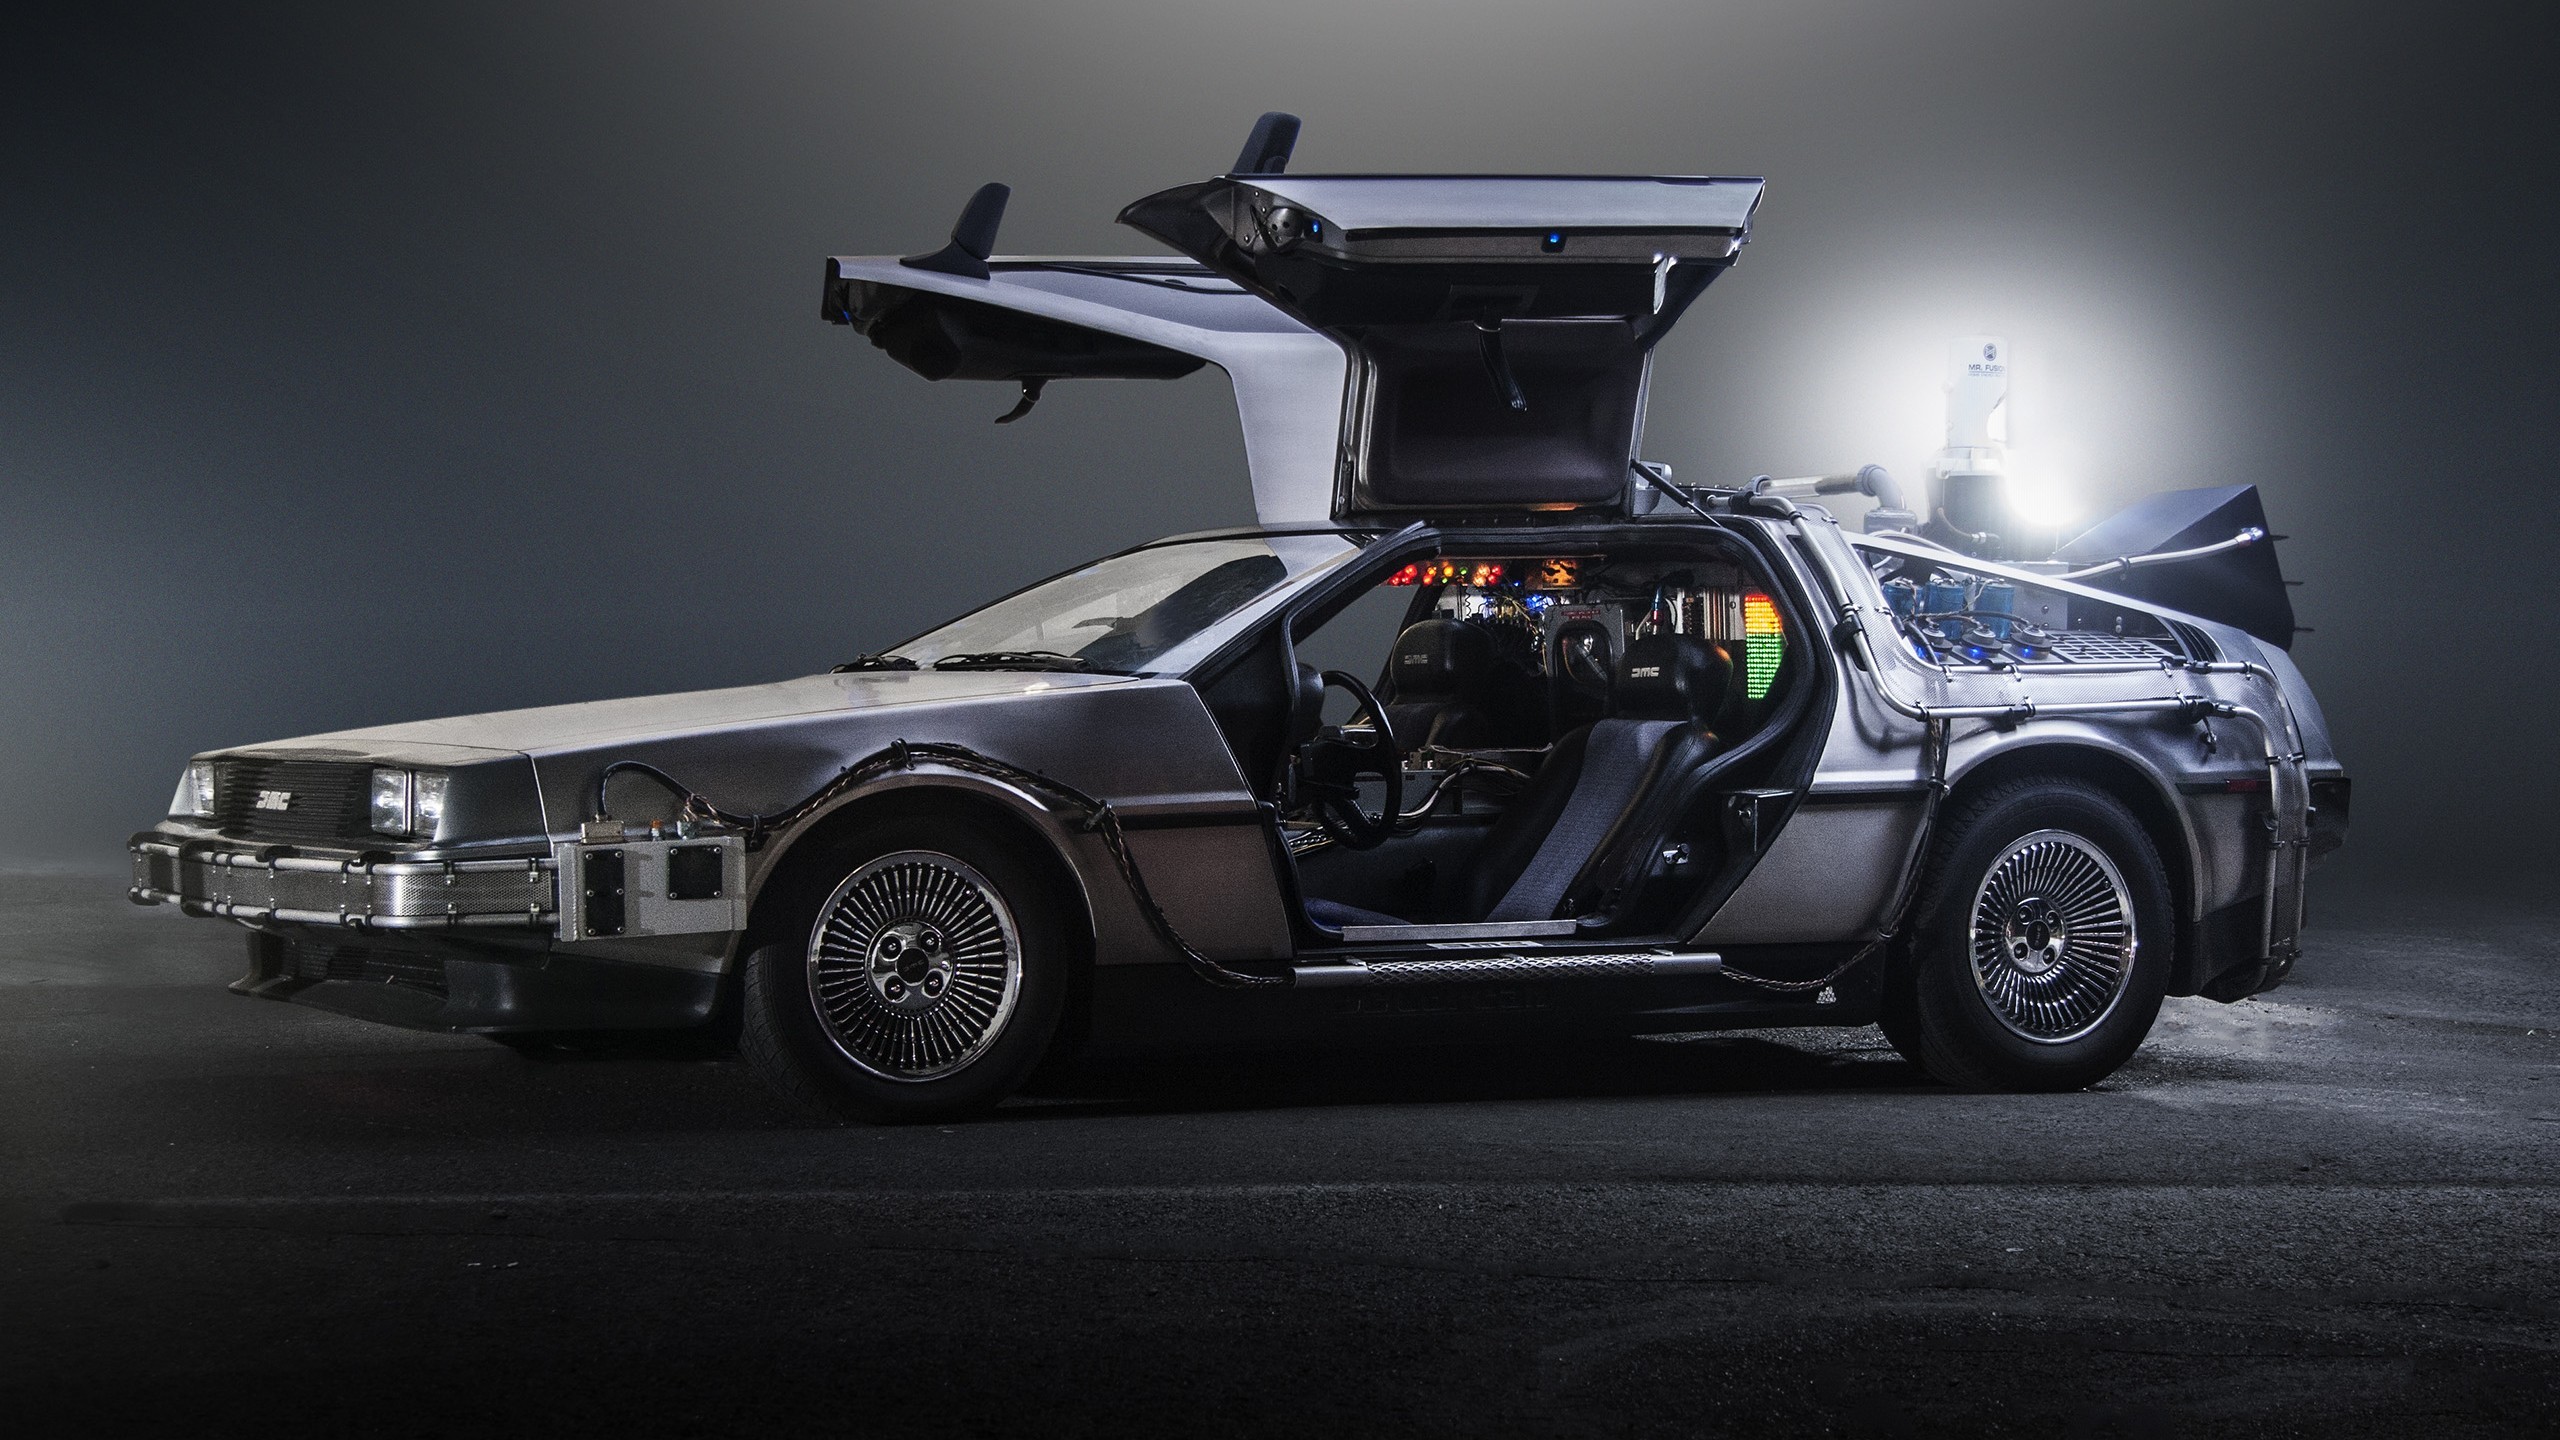 Best Site For Wallpapers For Desktop, Mobile & Tablets - Back To The Future Delorean - HD Wallpaper 